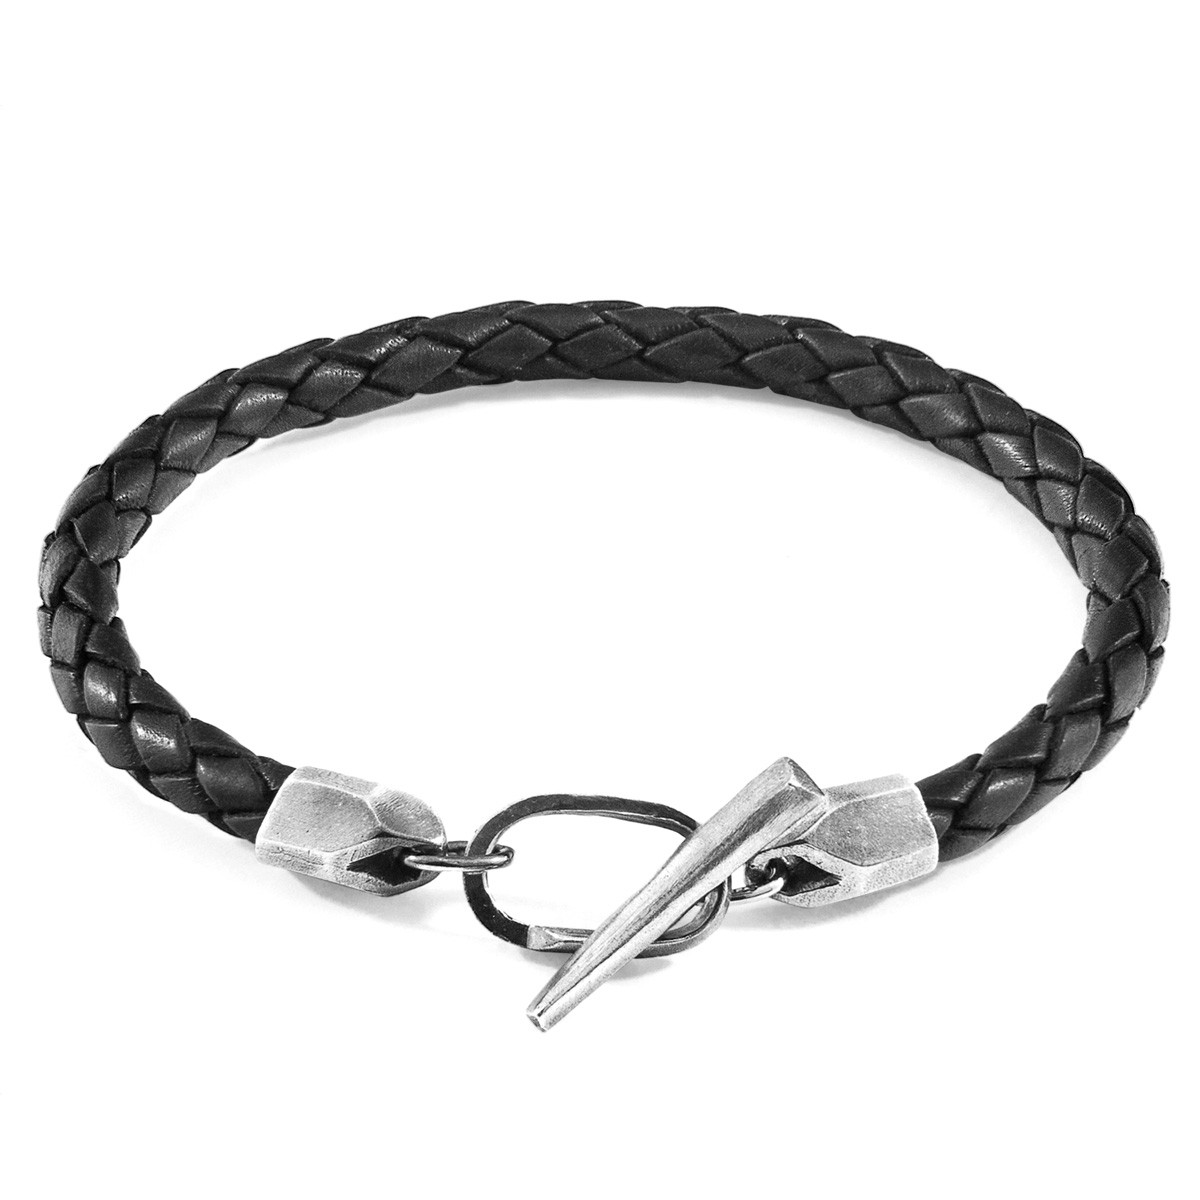 Anchor & Crew Midnight Black Jura Silver and Braided Leather Bracelet